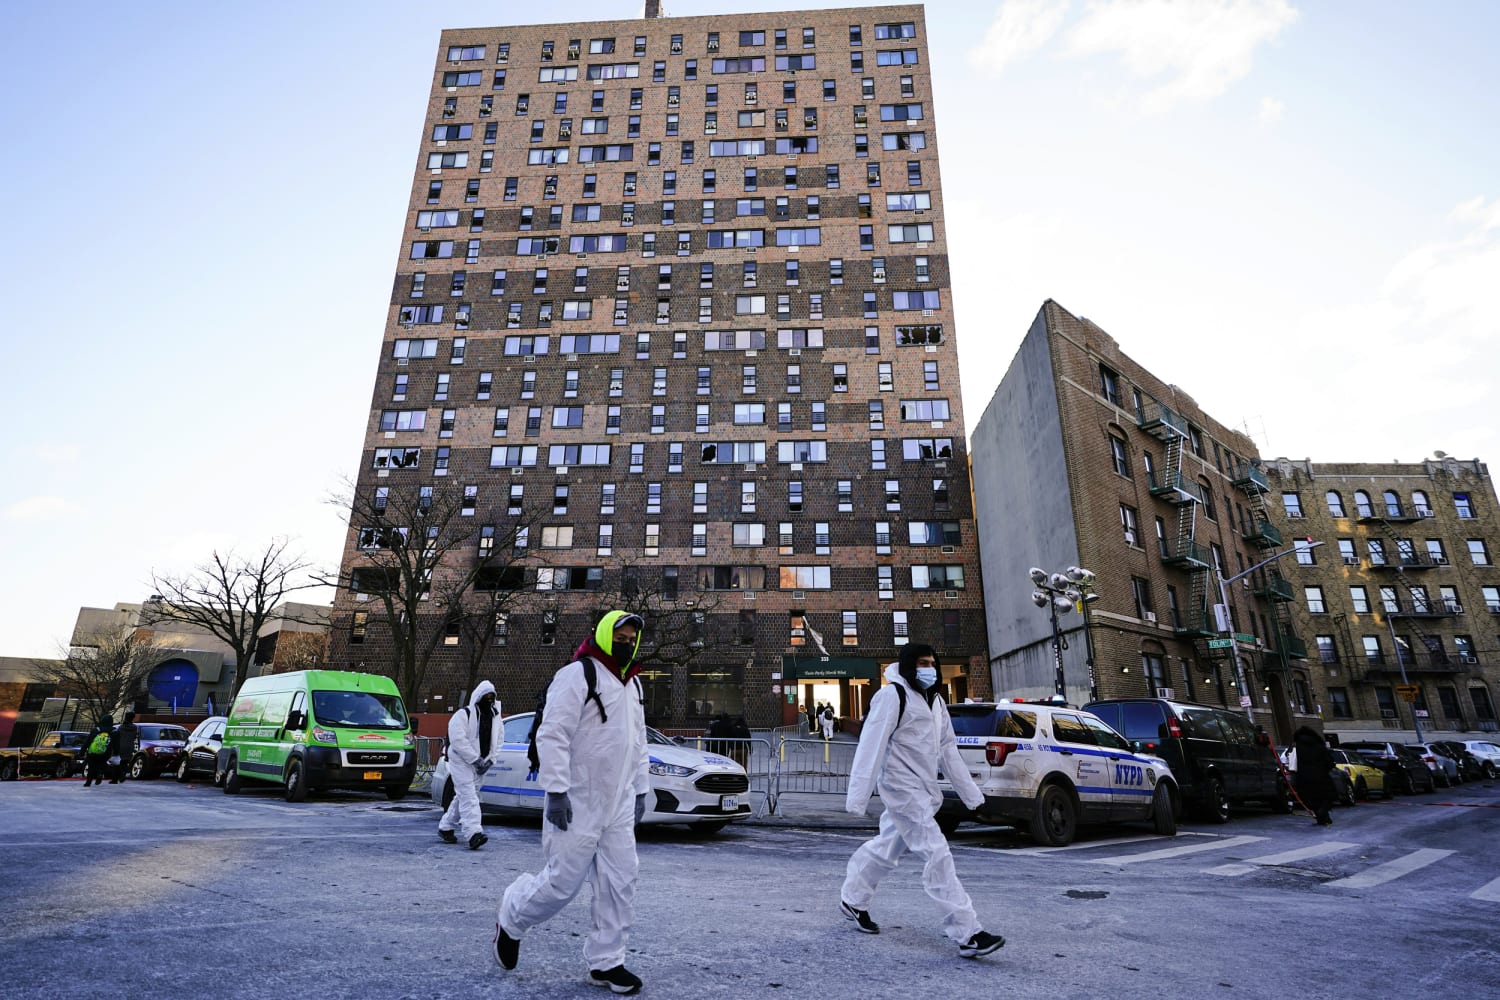 Deadly Bronx fire puts focus on space heaters some see as ‘symbols of inequity’